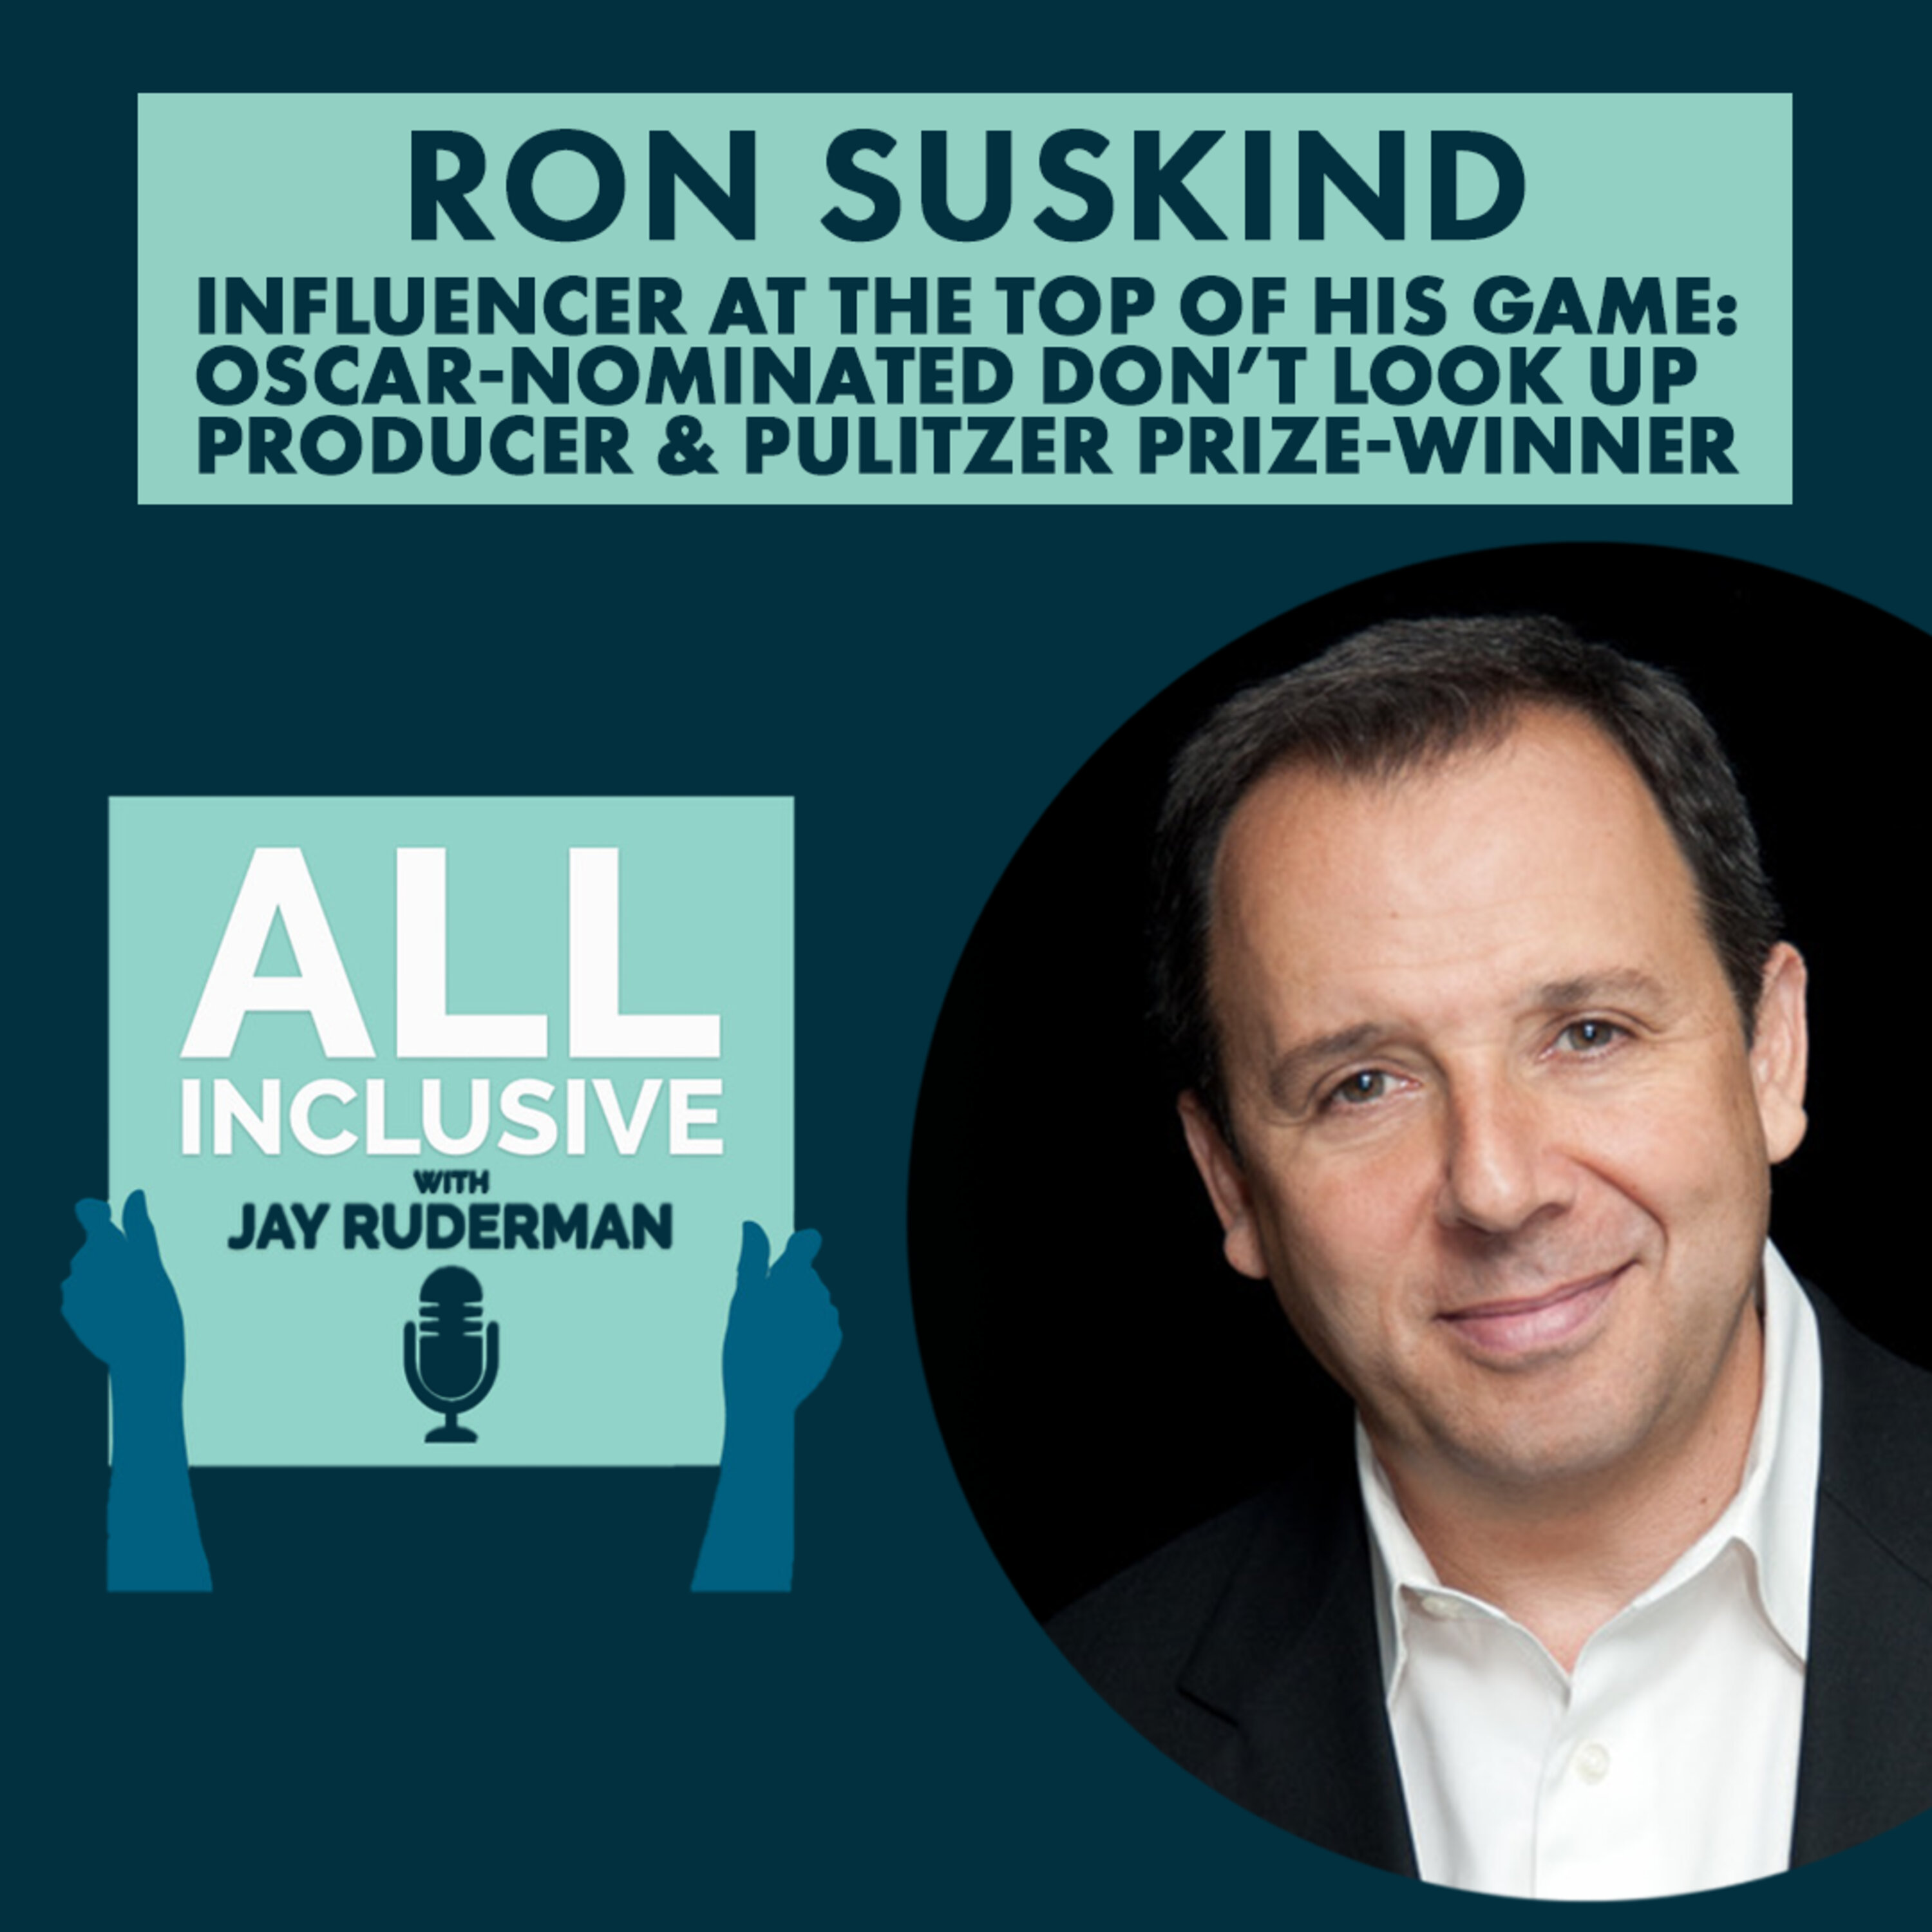 Ron Suskind – Influencer at the Top of His Game: Oscar-nominated Don’t Look Up Producer & Pulitzer Prize-Winner